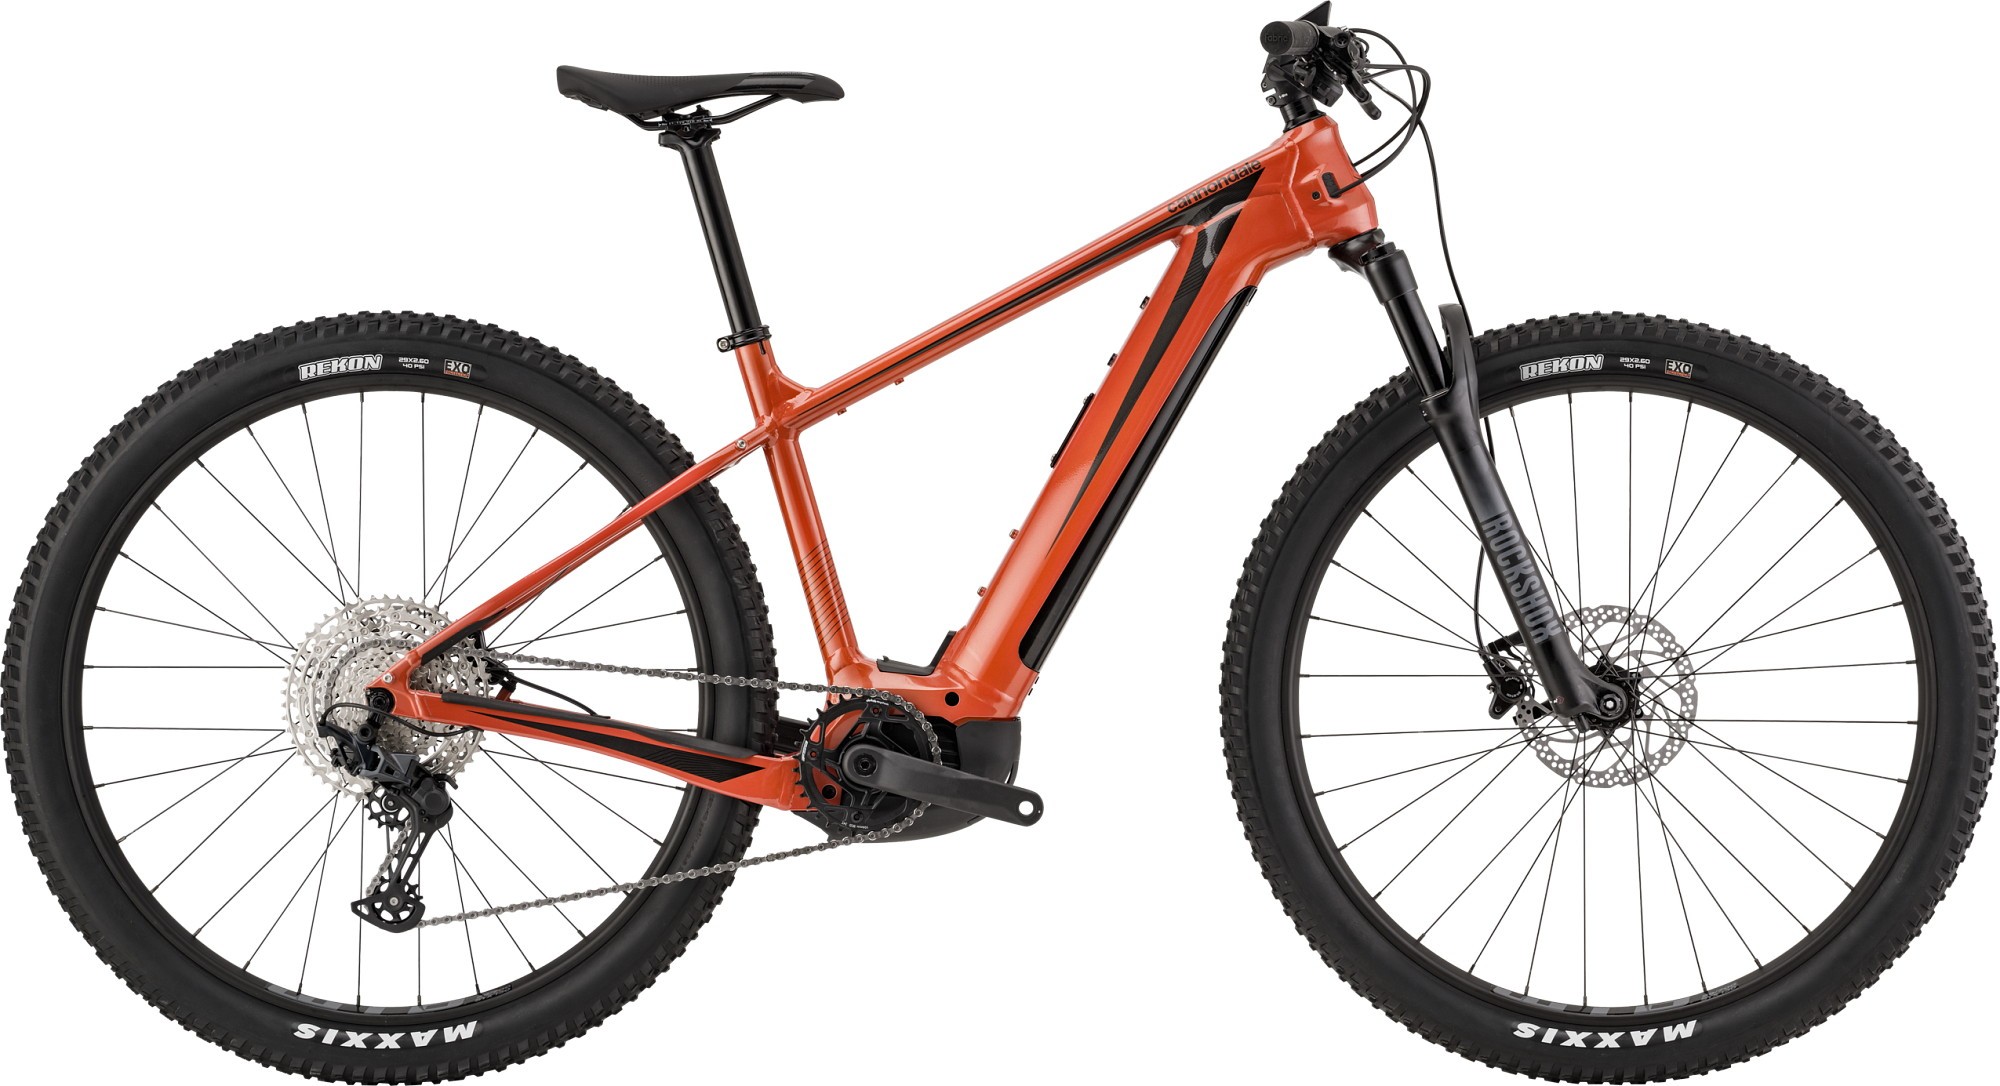 trail-neo-1-hardtail-e-mtb-brings-peak-bosch-components-and-likes-to-play-dirty_1